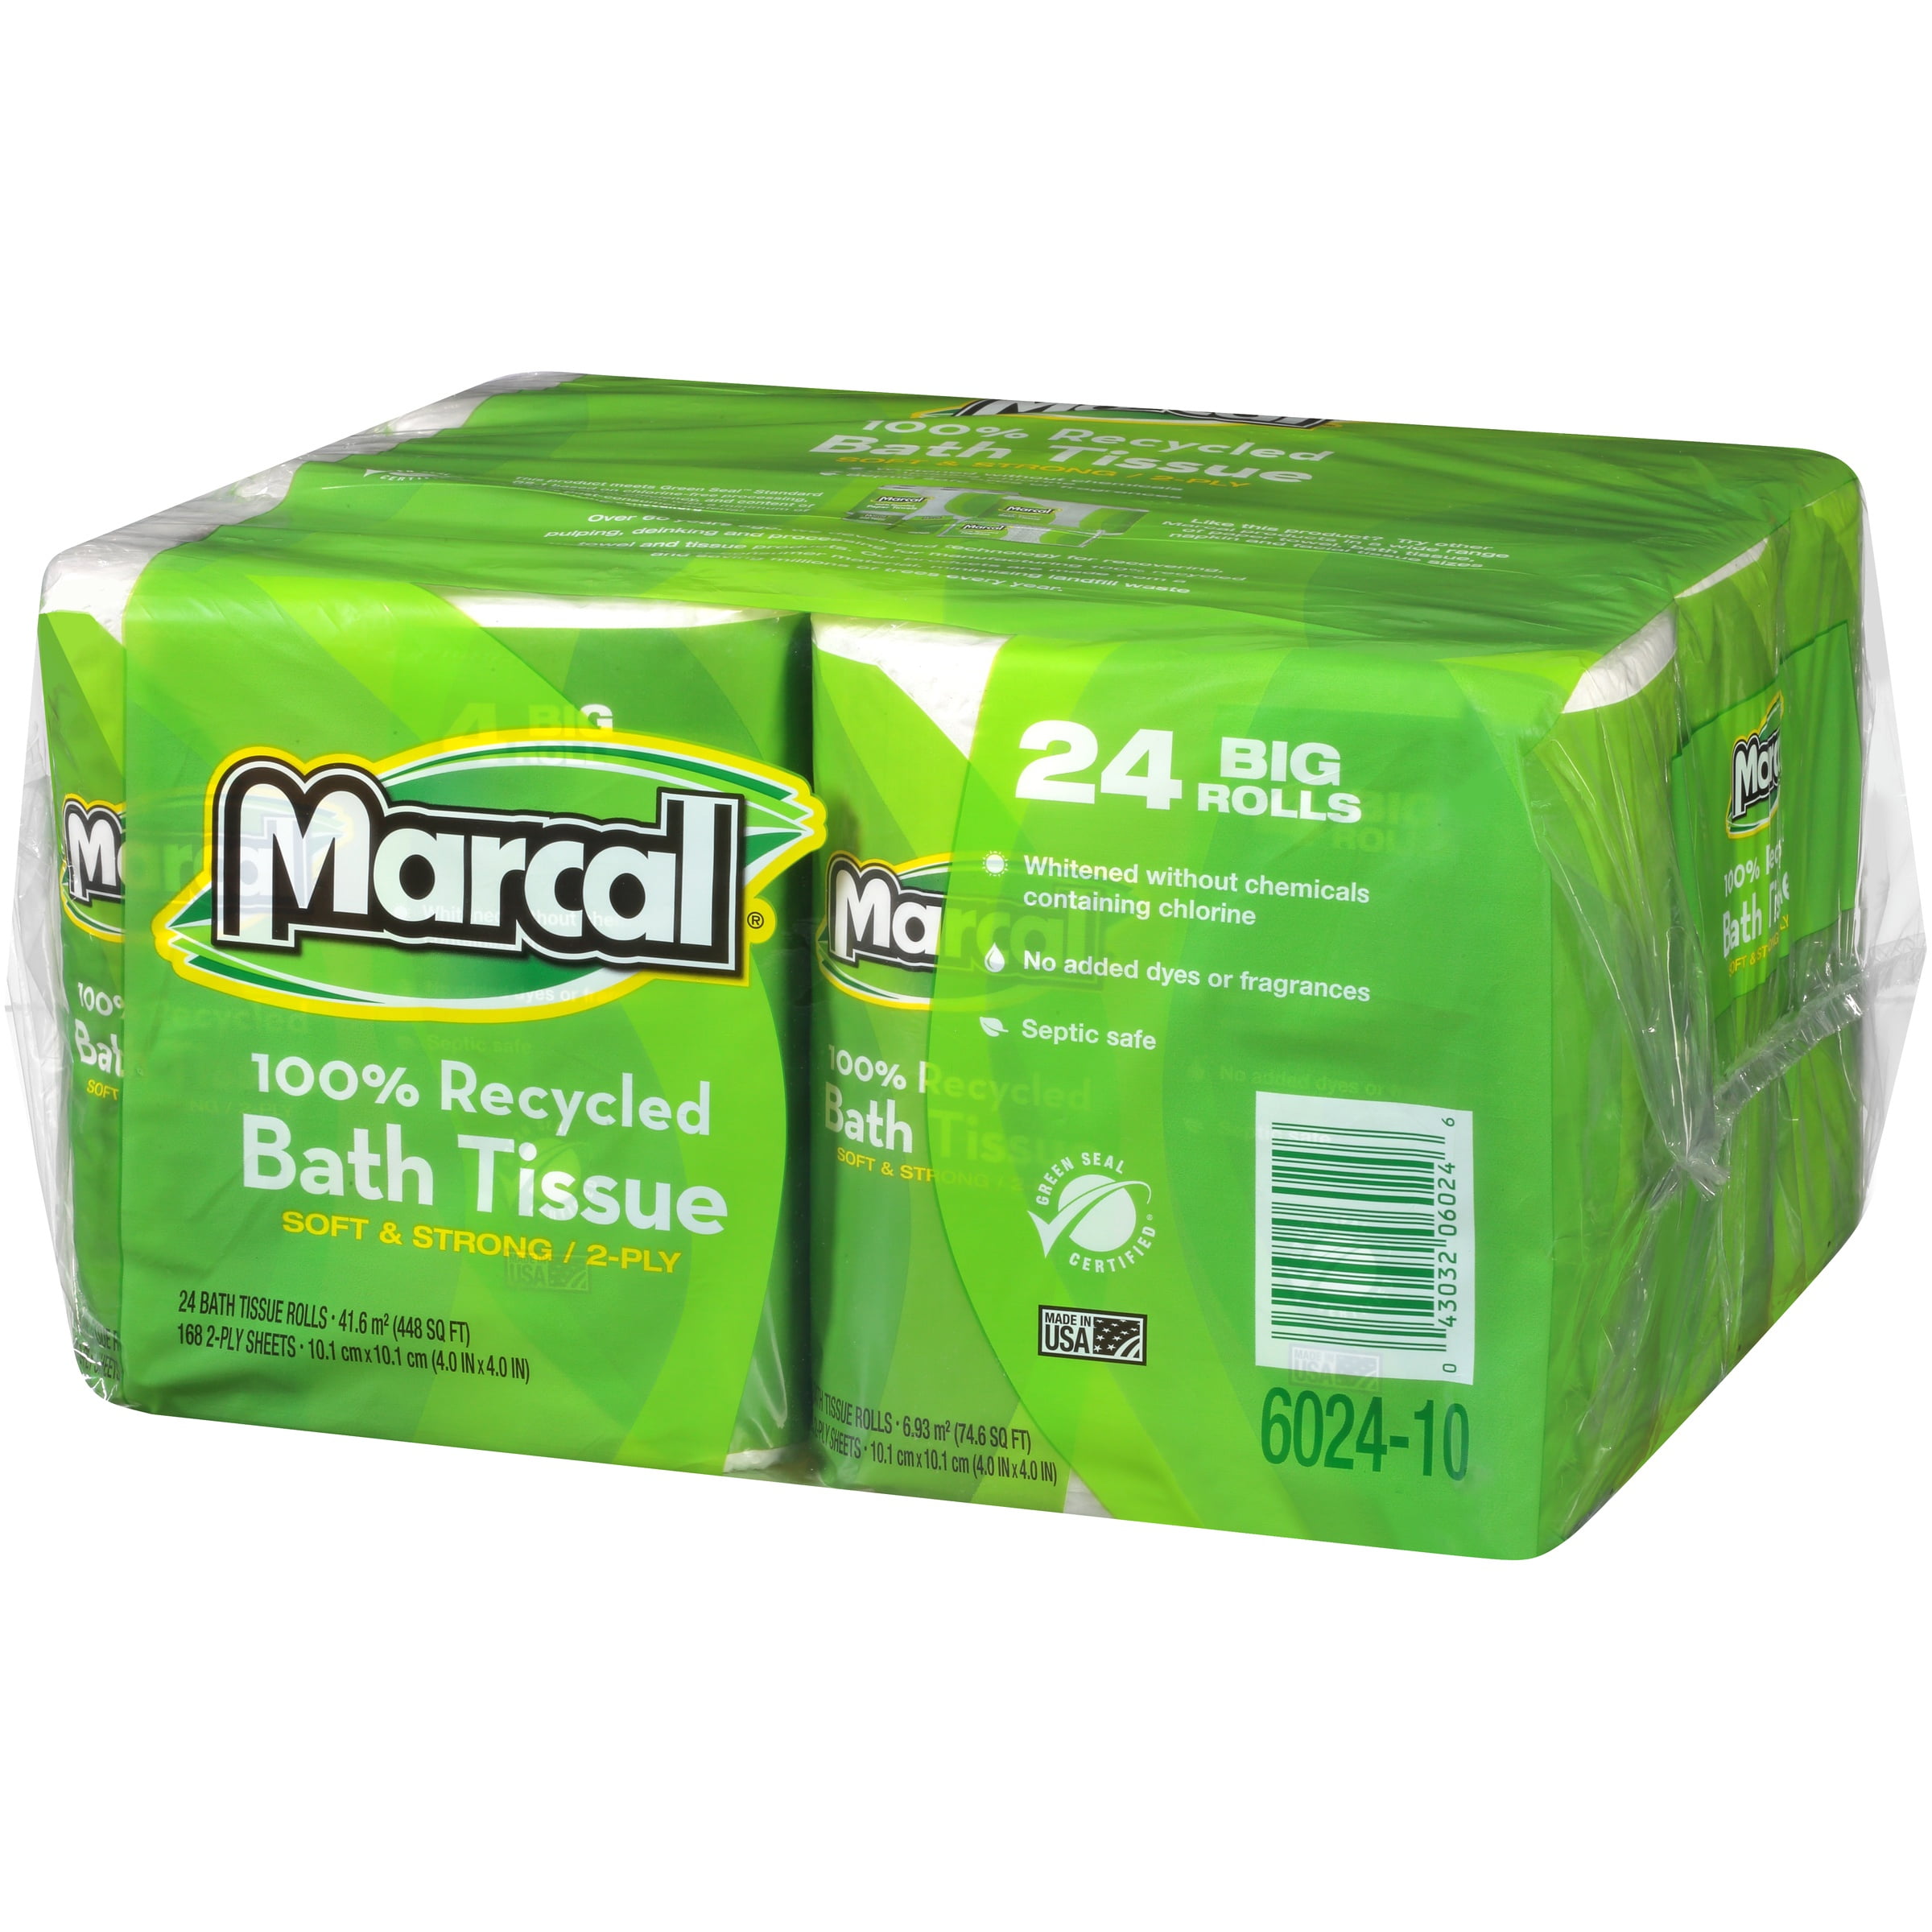 Marcal Recycled Toilet Paper, 24 Big Rolls - 2